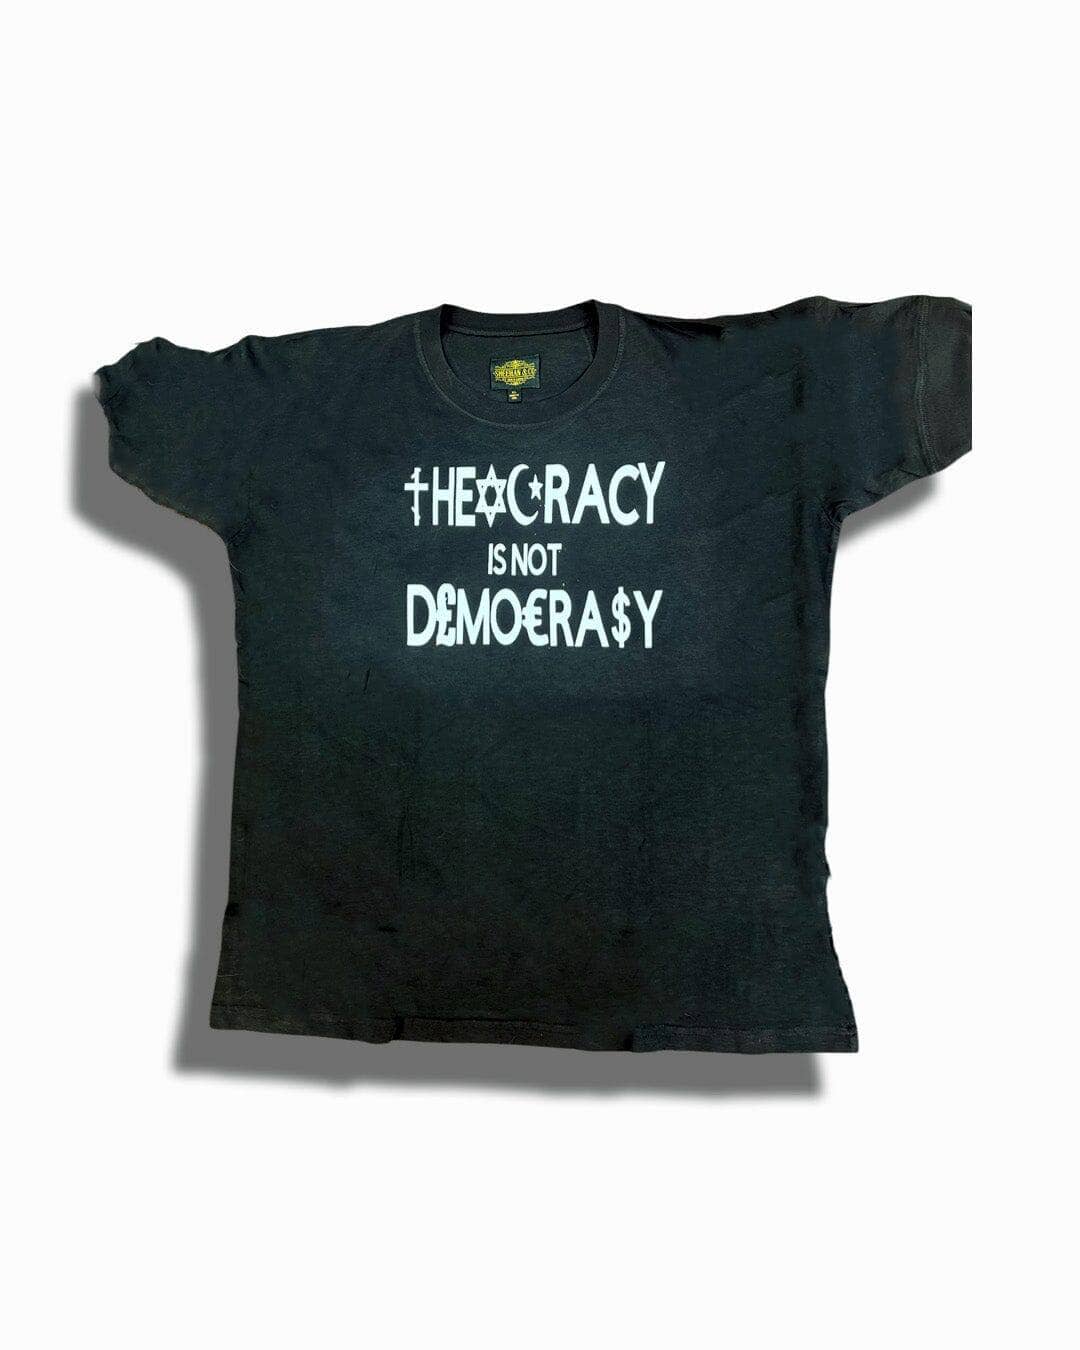 Theocracy is NOT Democracy - Statement Graphic Tee | Sheehan&Co  Meta Description: Get your statement on with this snarky graphic tee from Sheehan&Co. - Sheehan and Co.